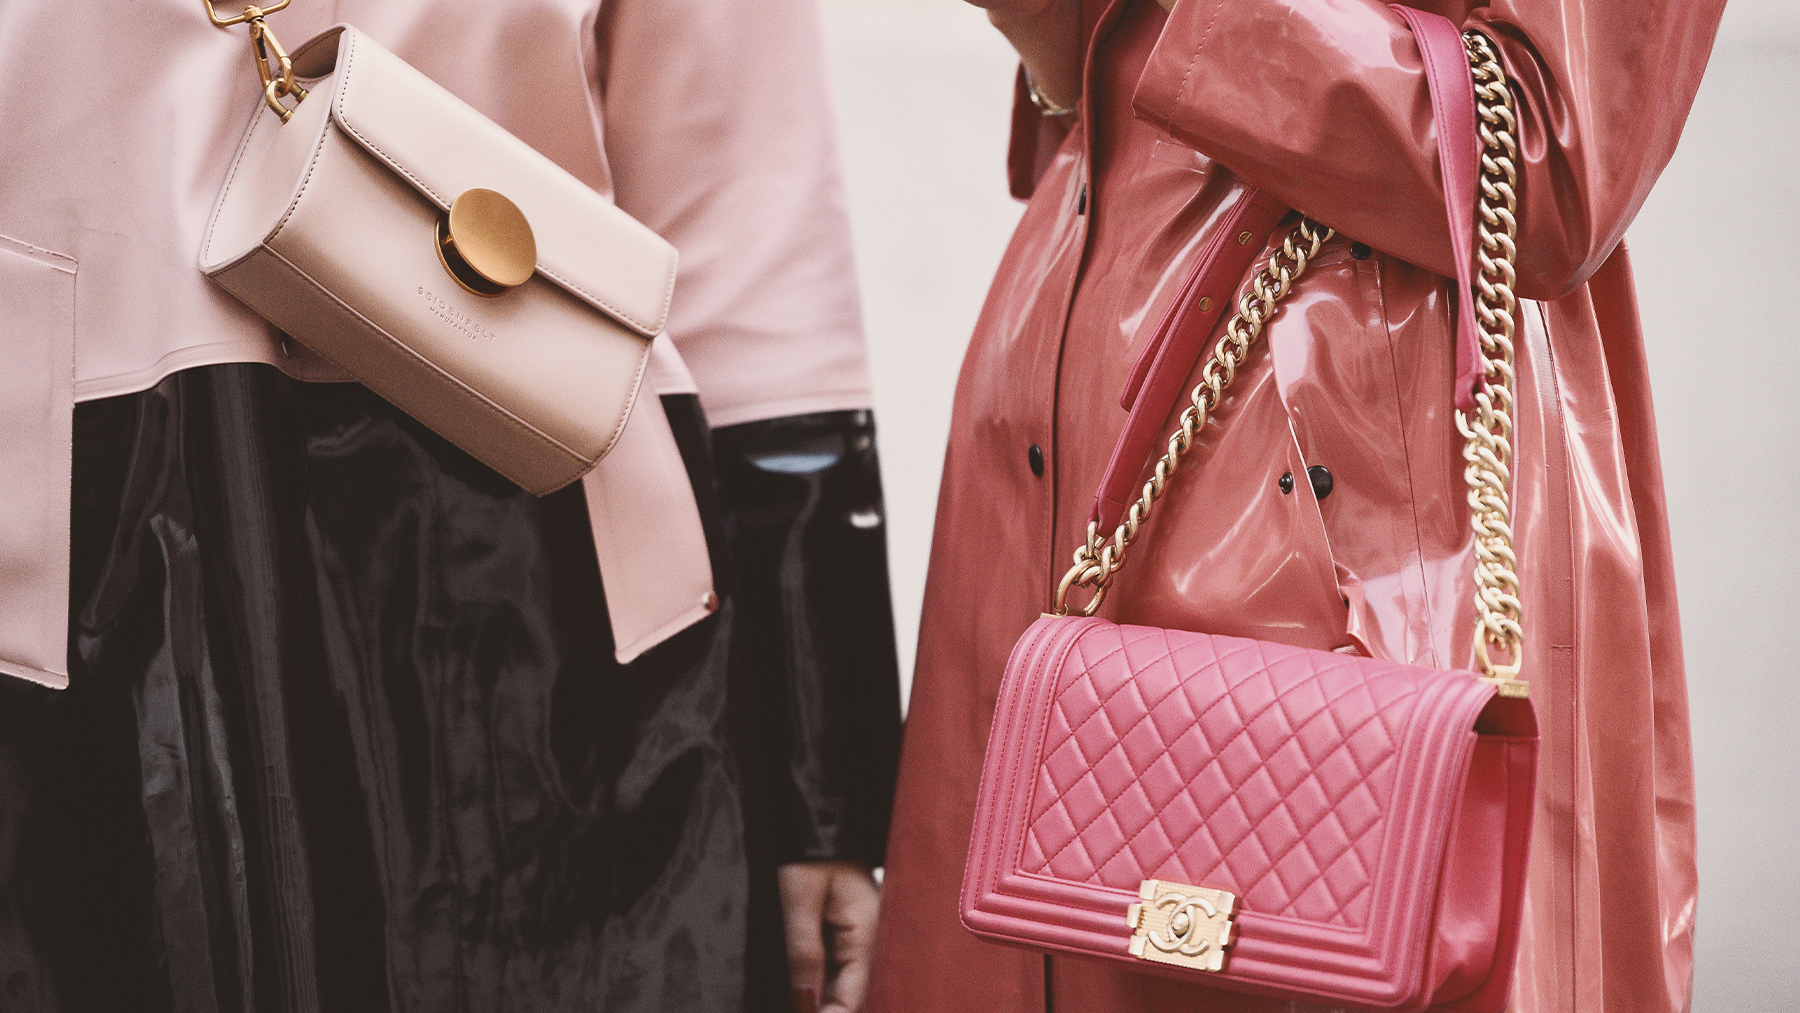 China's middle class stampede for luxury handbags